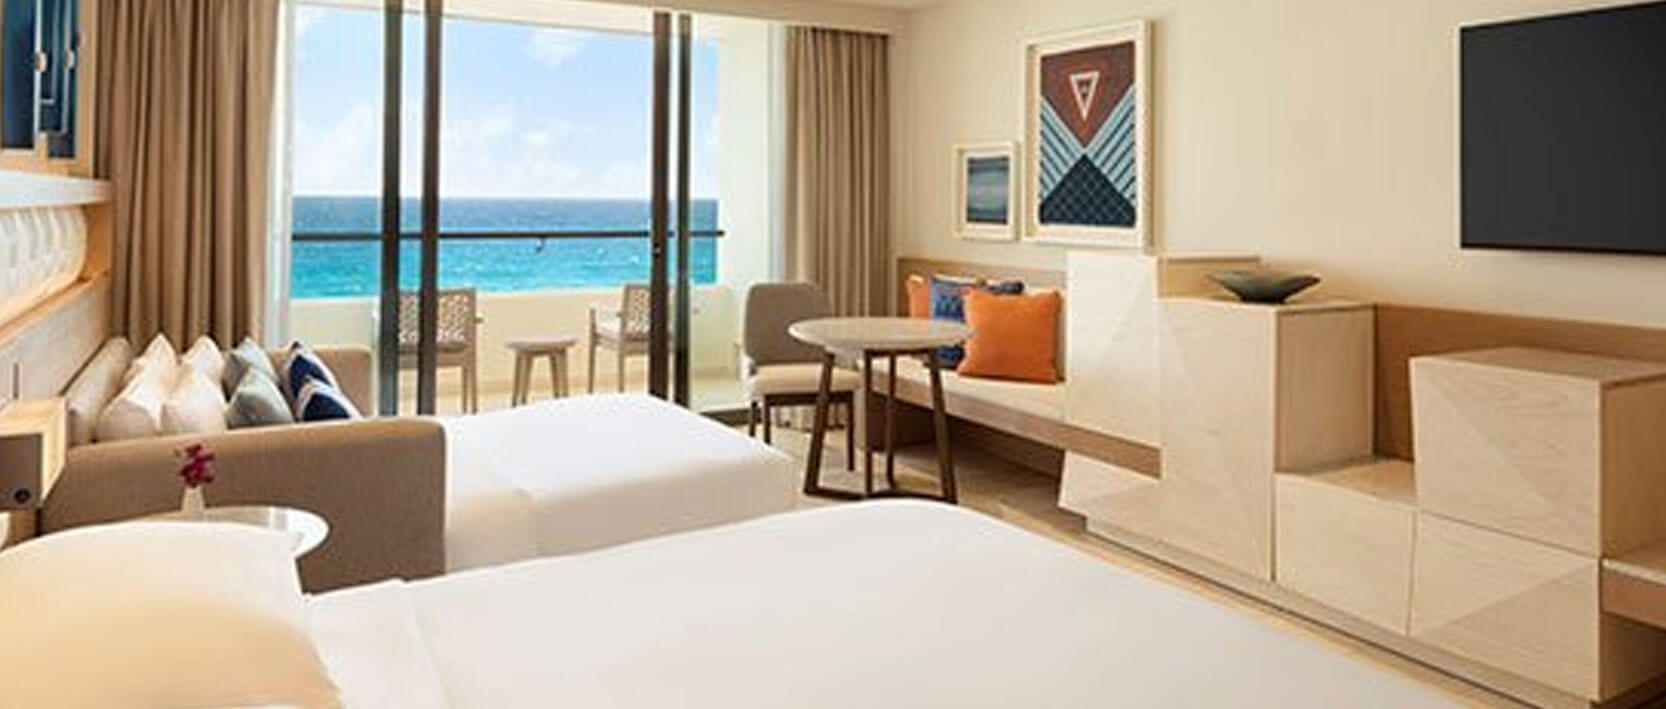 Hyatt Ziva Cancun Accommodations - Oceanfront King (With Sofa Bed) or Double